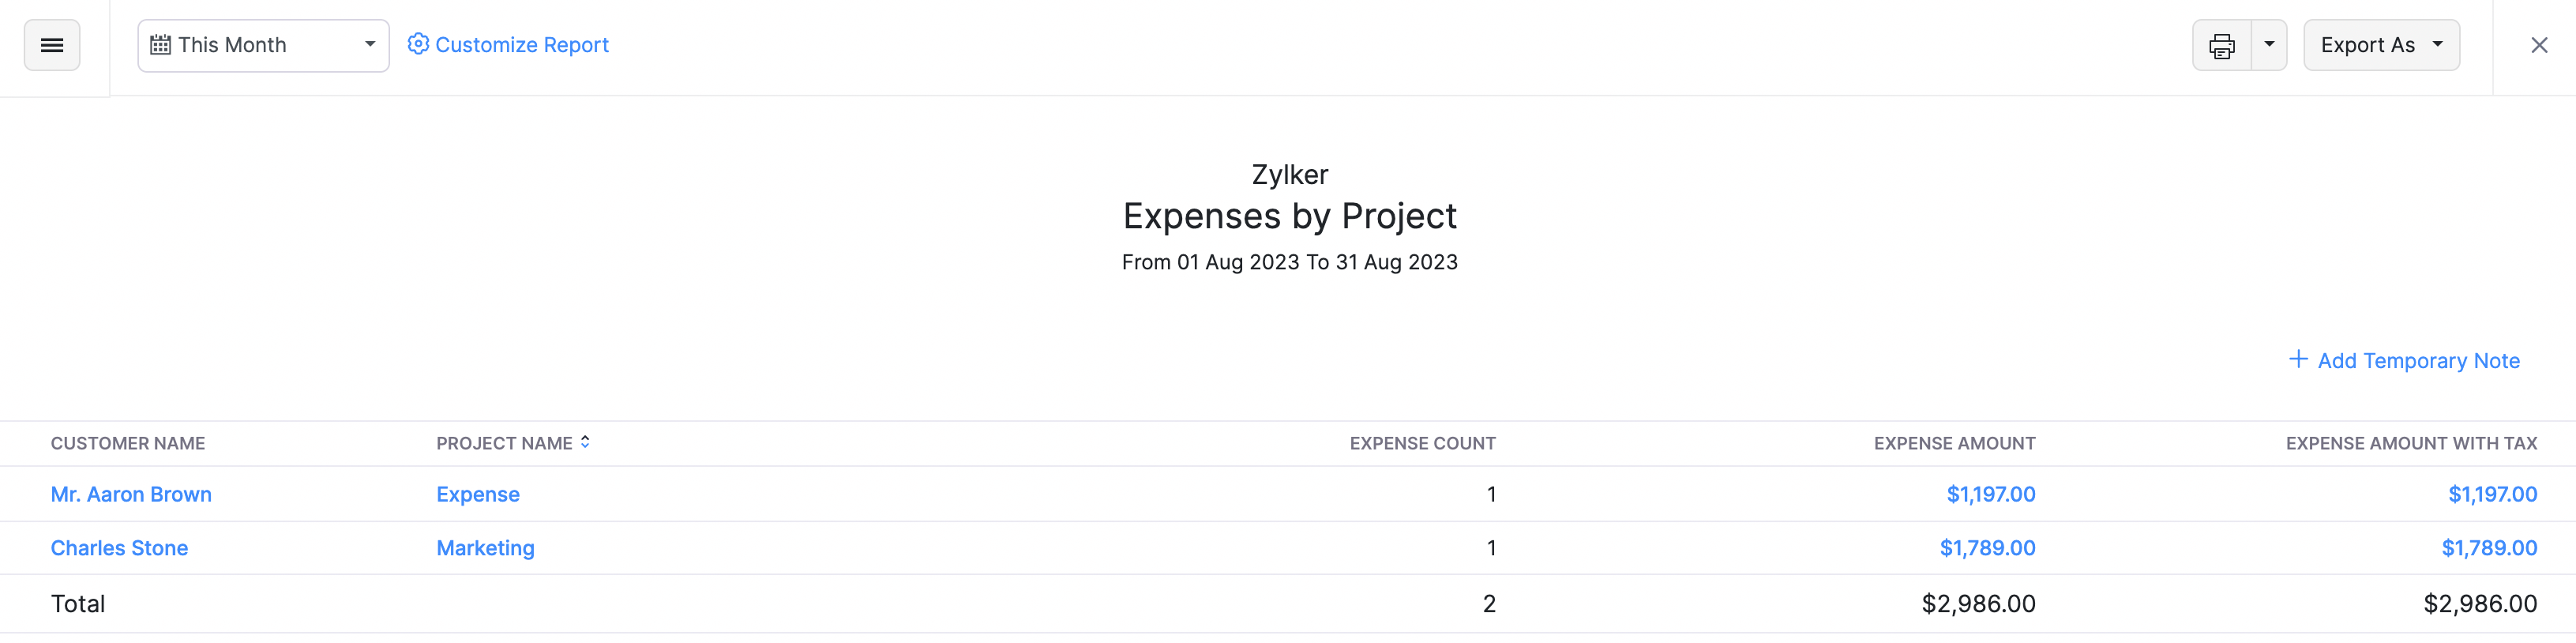 Expense by Projects Report